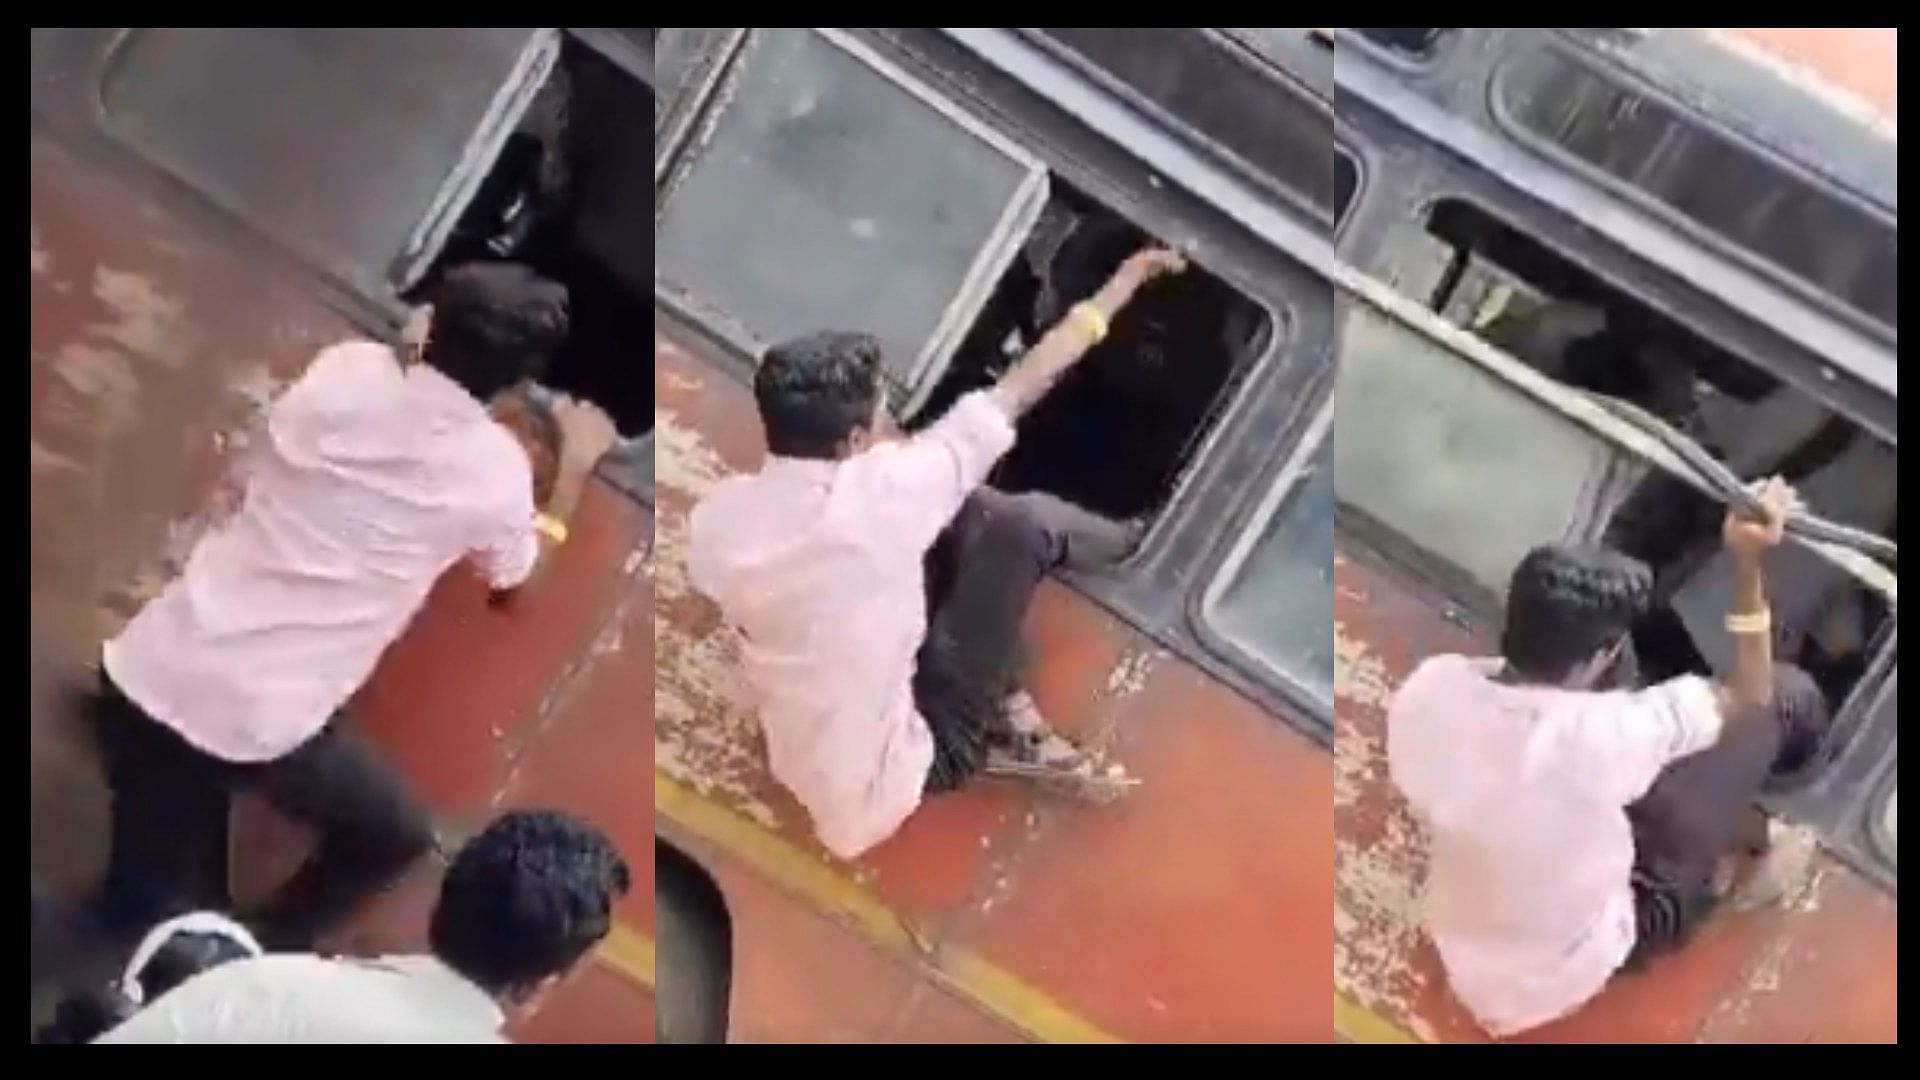 The man was entering through the window of the bus to get a seat video goes viral on social media